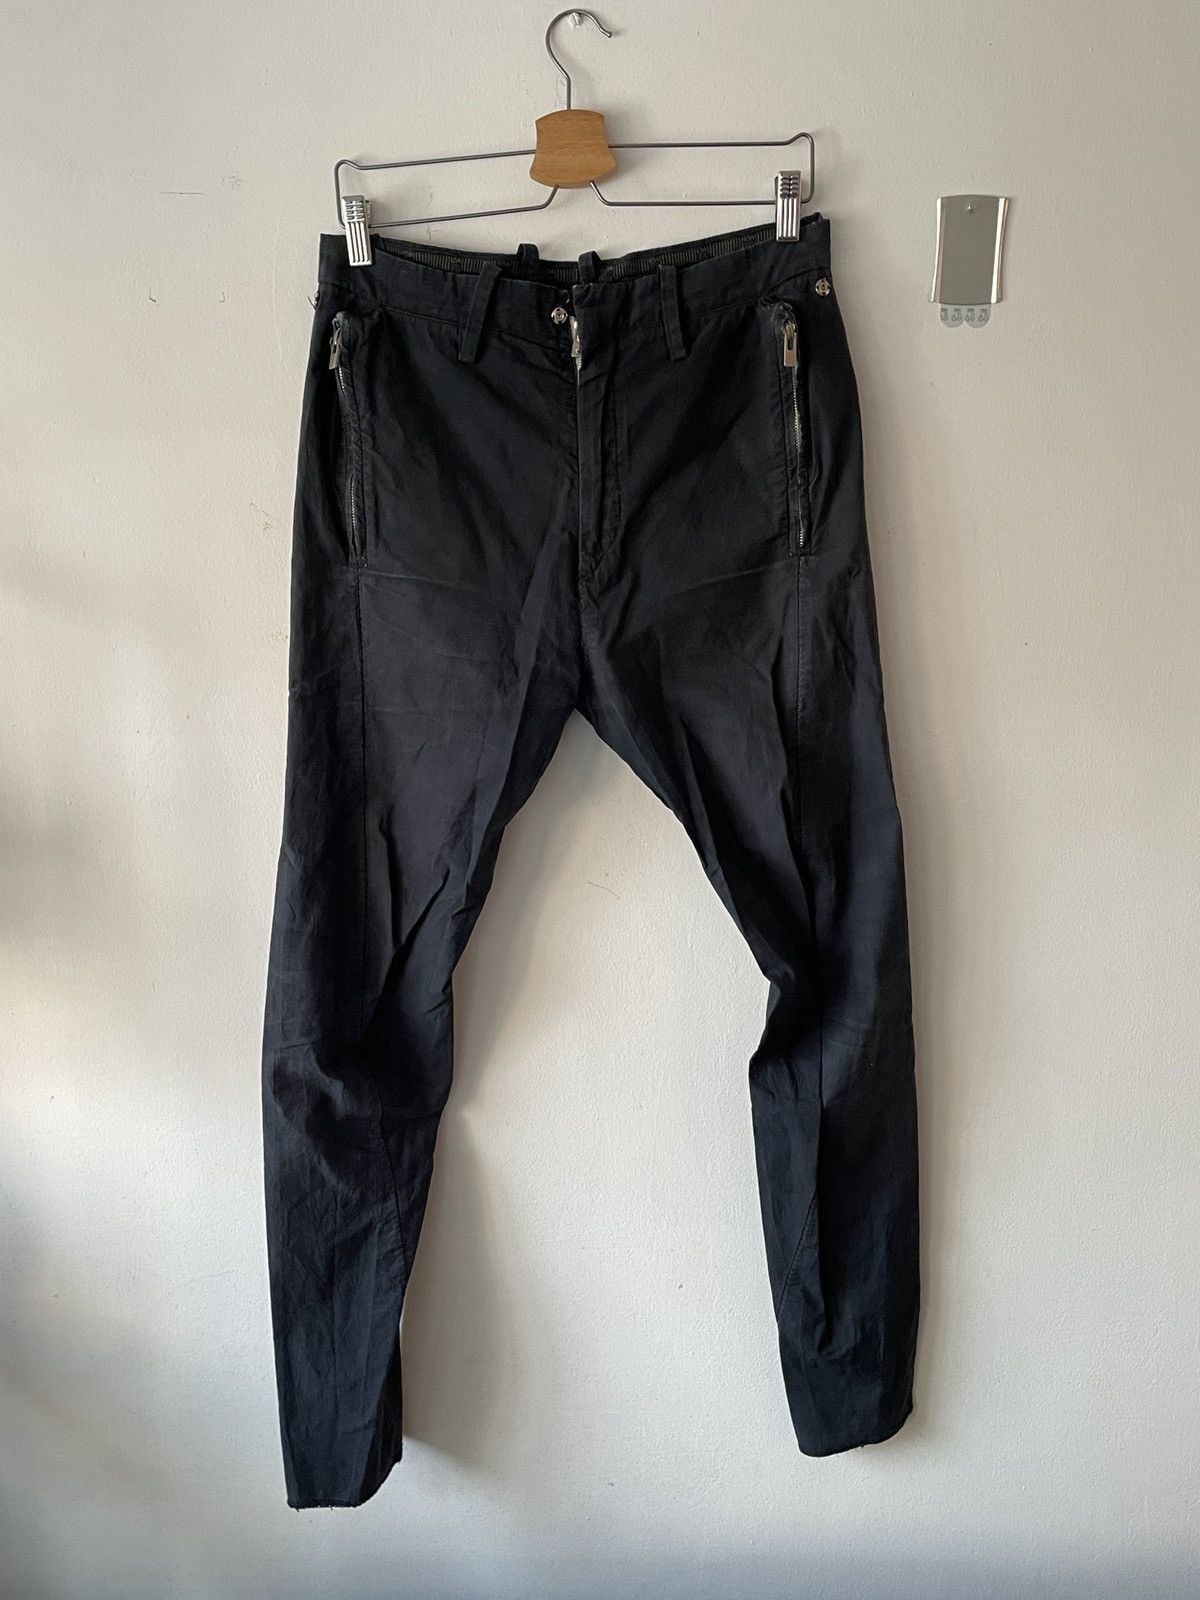 Carol Christian Poell Overdyed Front Zip Meltlock trousers | Grailed